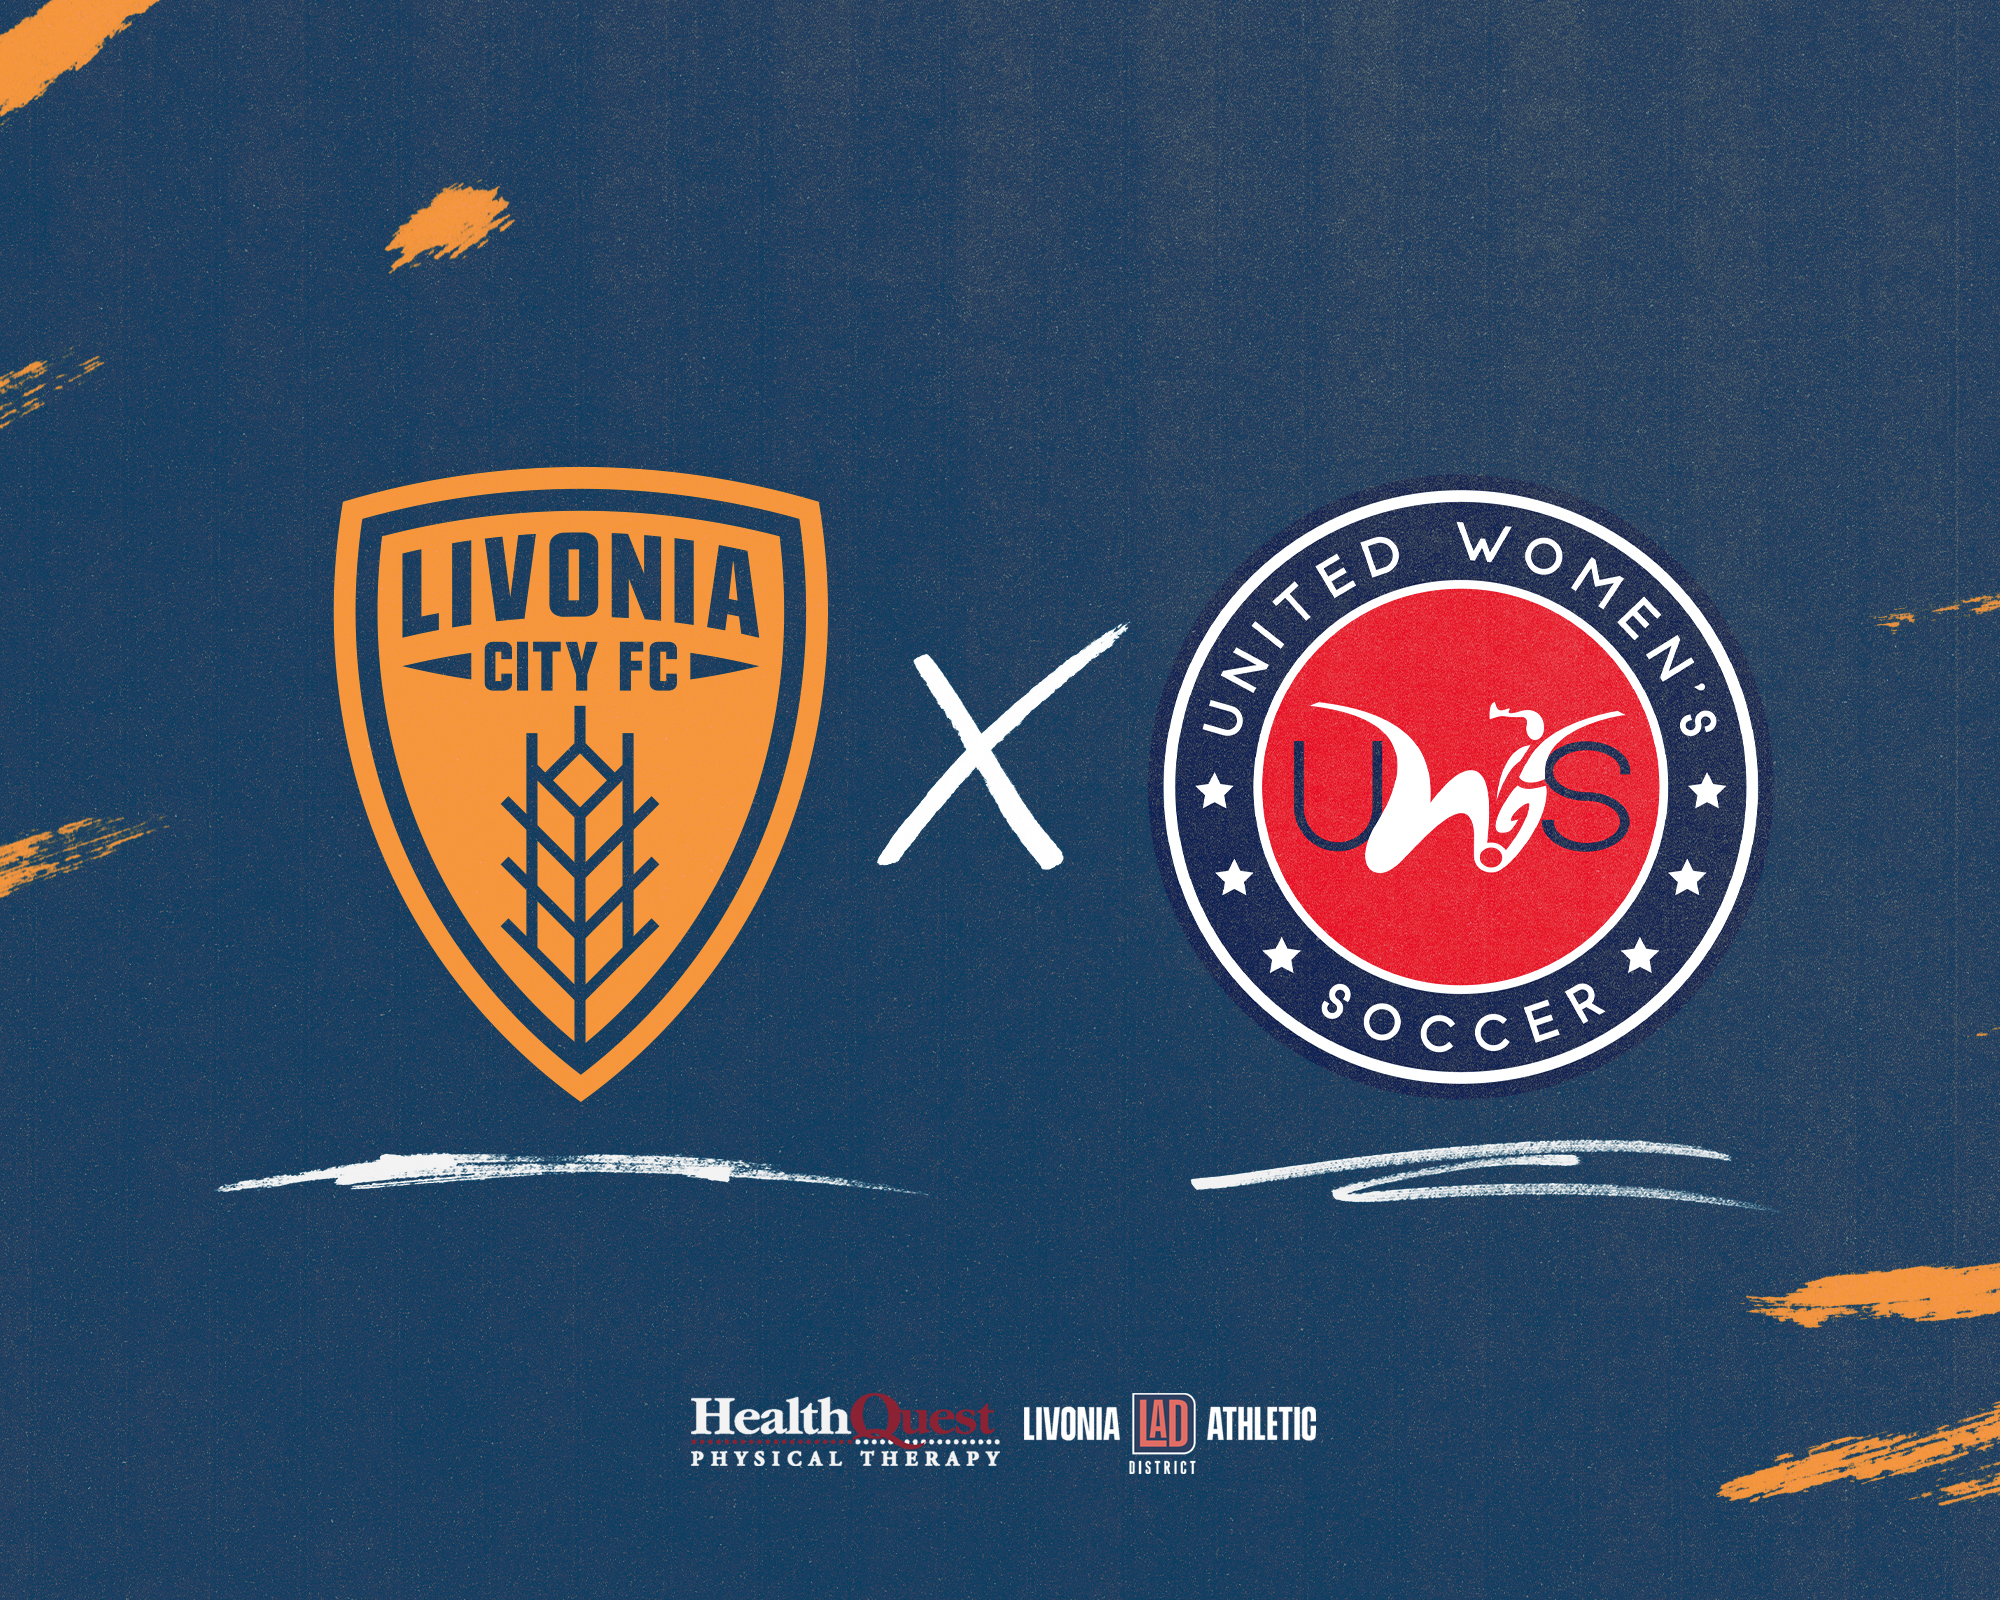 LCFC Joins United Women’s Soccer League One